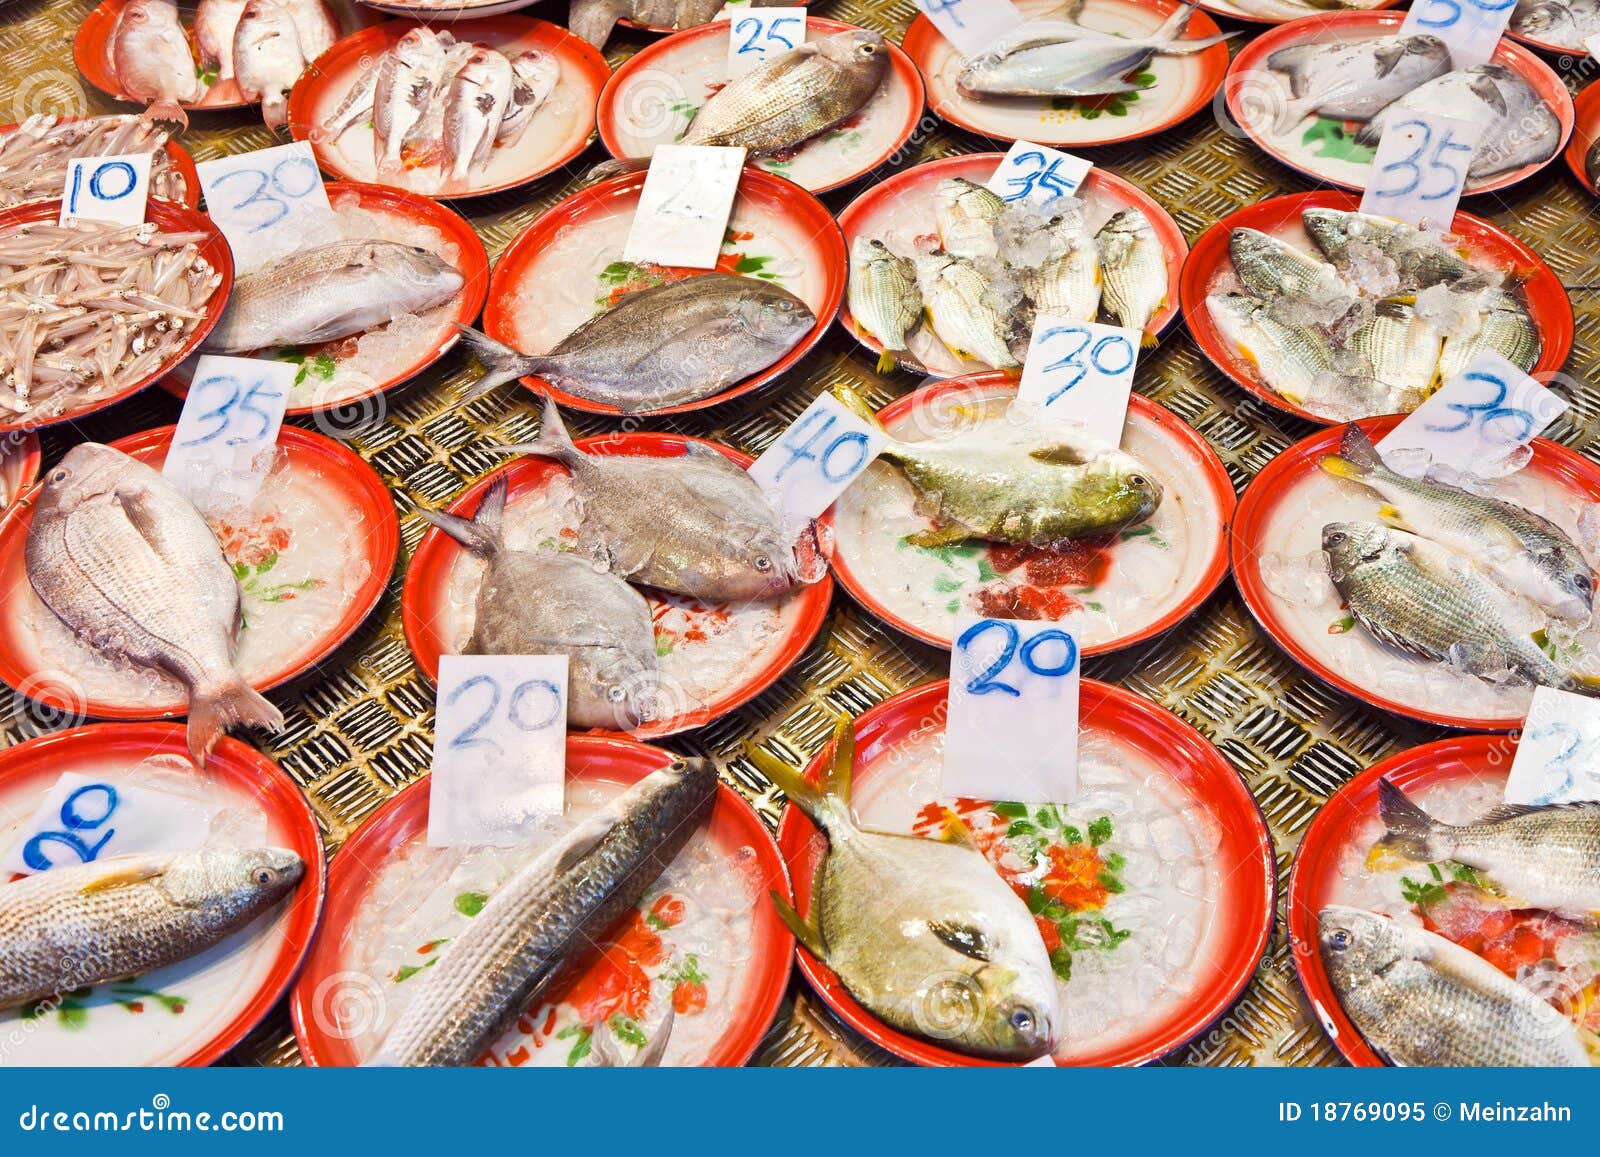 Whole Fresh Fishes Are Offered In The Fish Market Stock Image Image